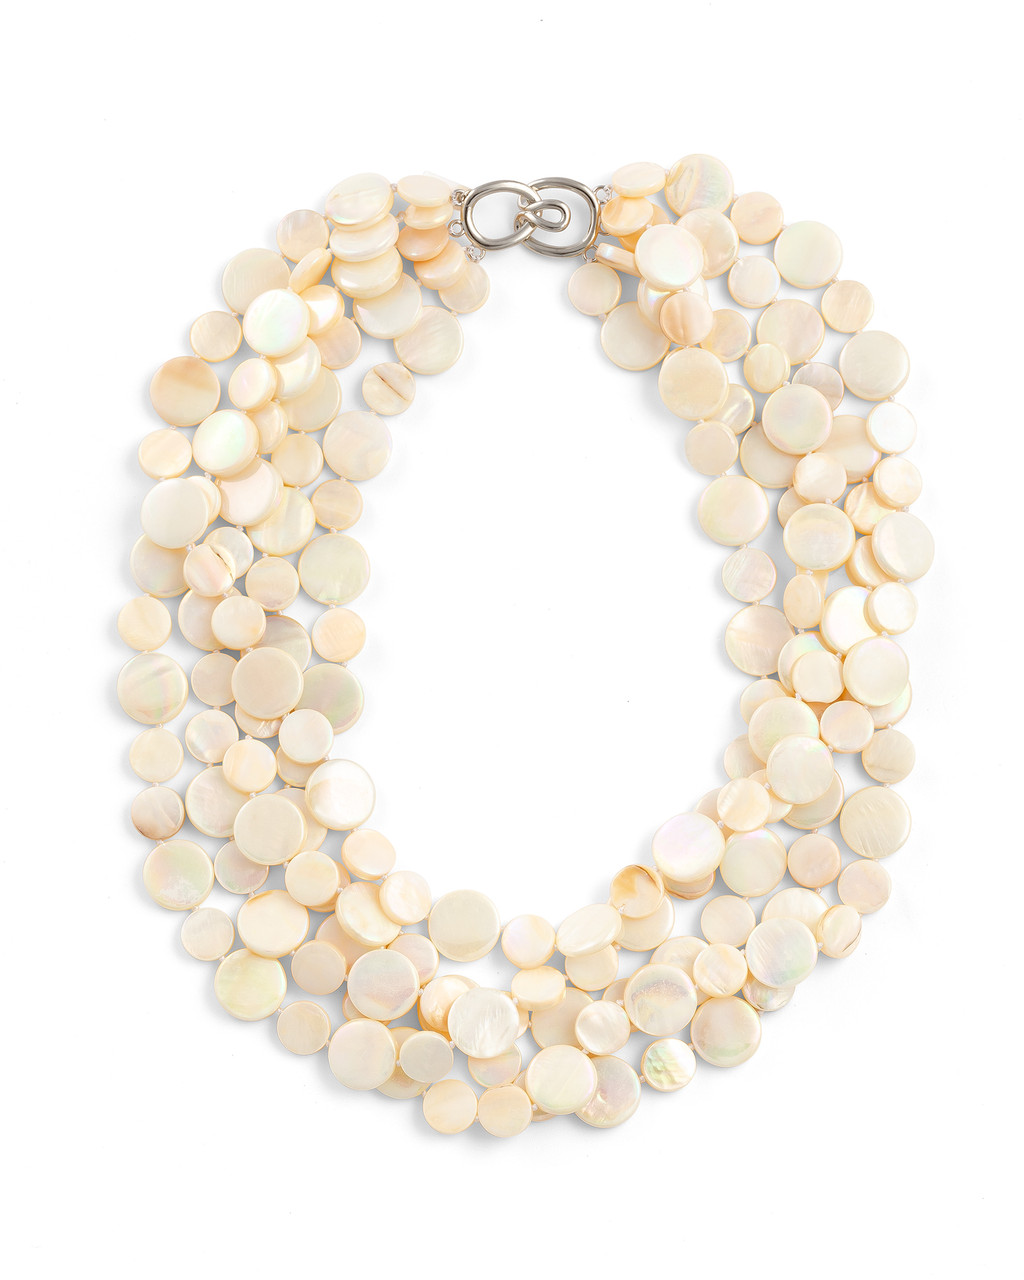 Mother-of-Pearl Necklace in Sterling Silver. 18